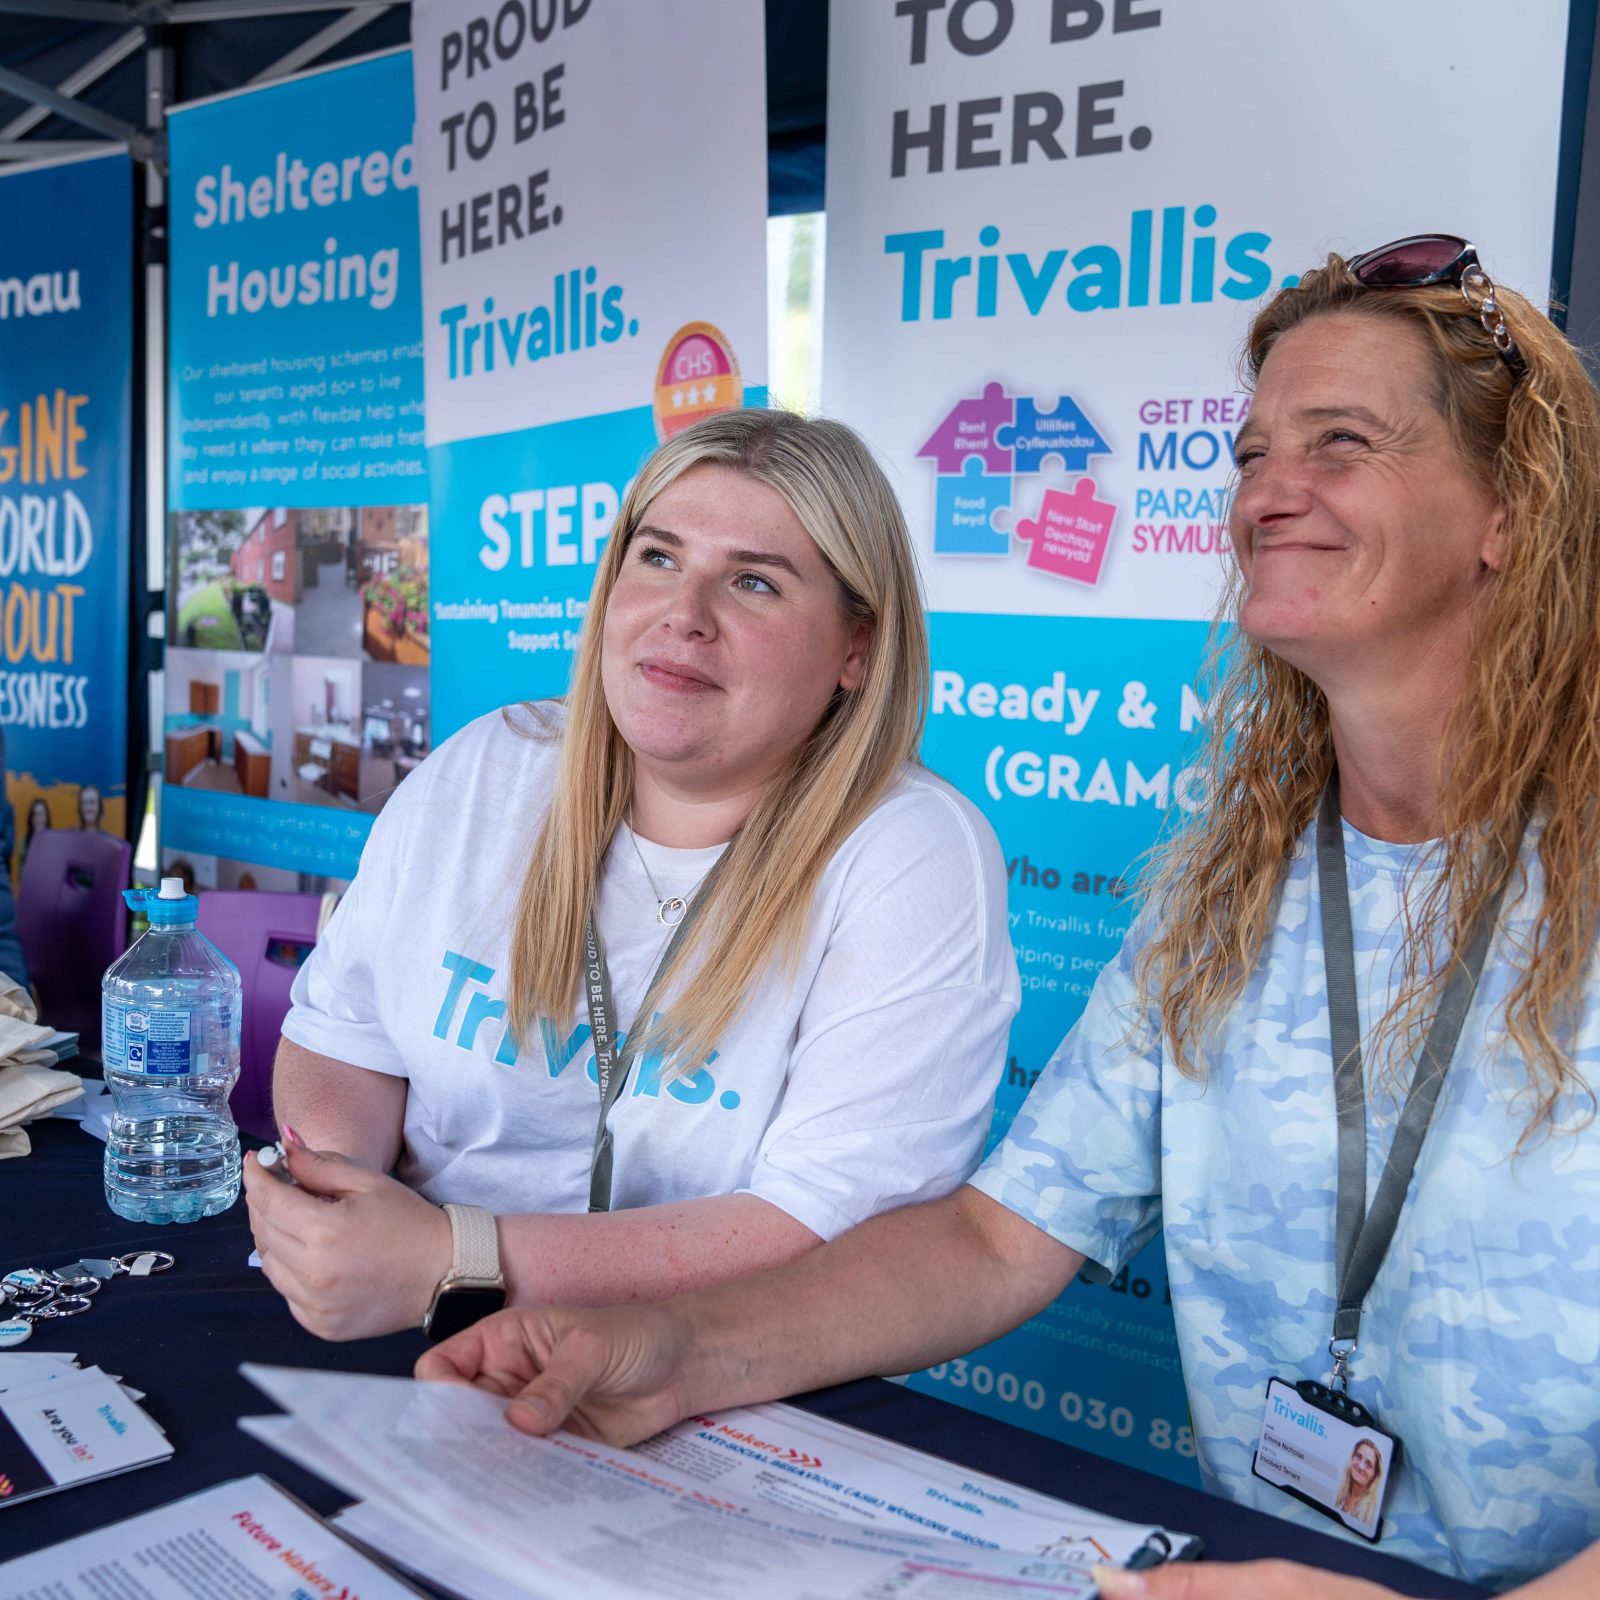 Trivallis Housing Landlord Wales Two women sitting at a booth with banners and promotional materials for Trivallis, a housing organization based in RCT, at a public event.